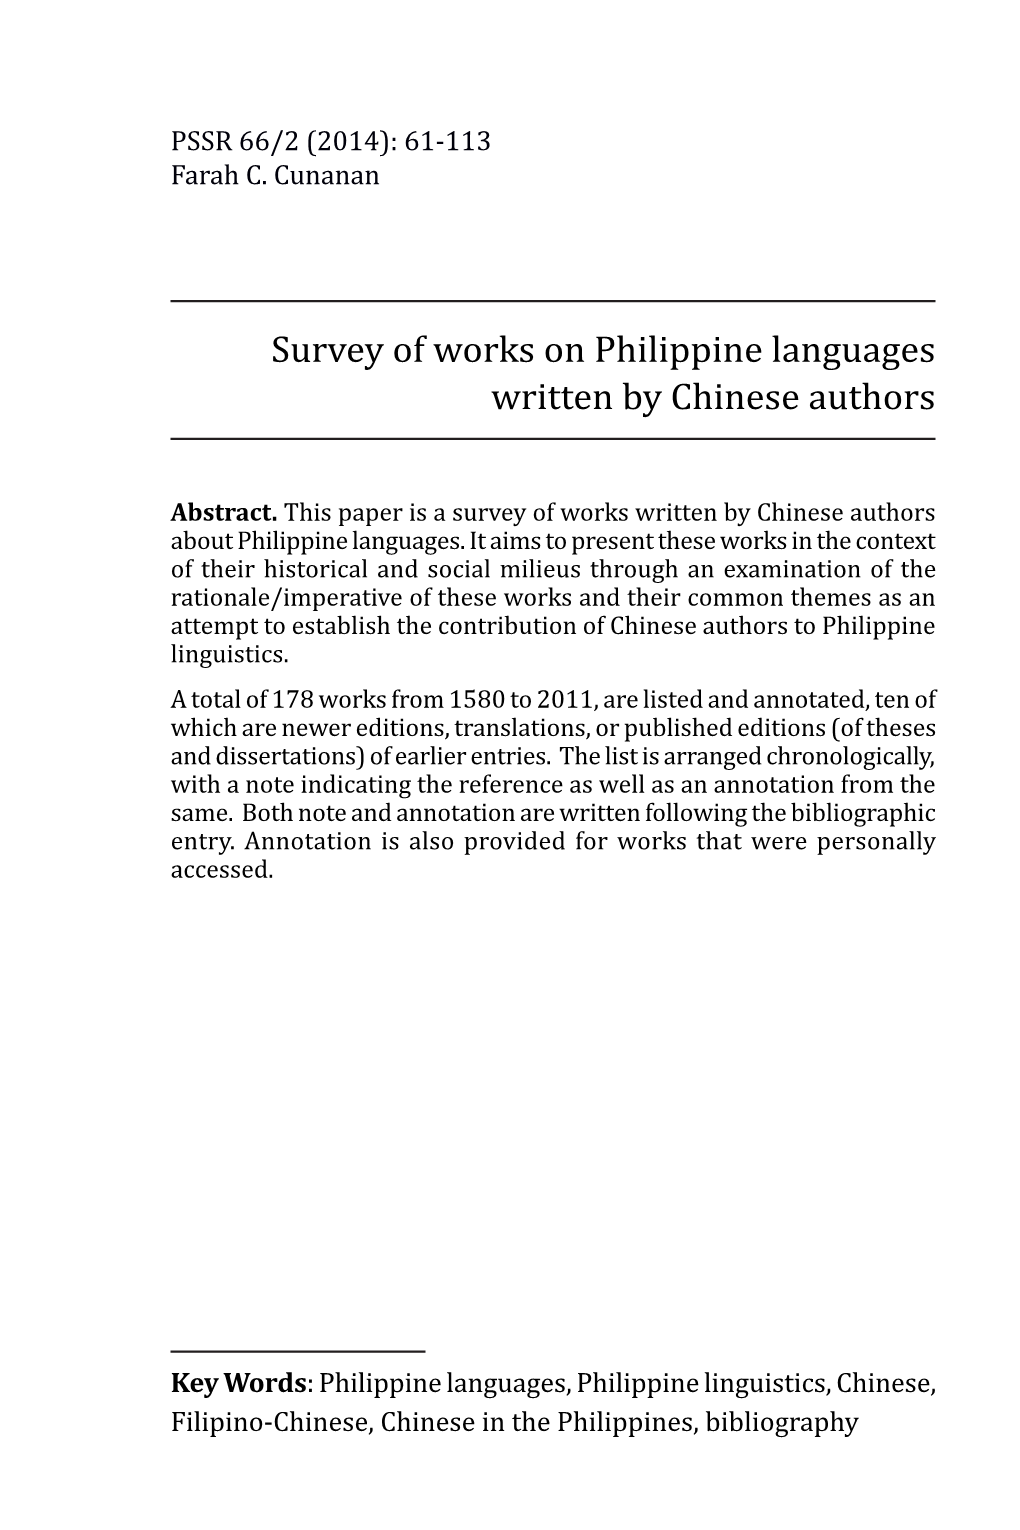 Survey of Works on Philippine Languages Written by Chinese Authors